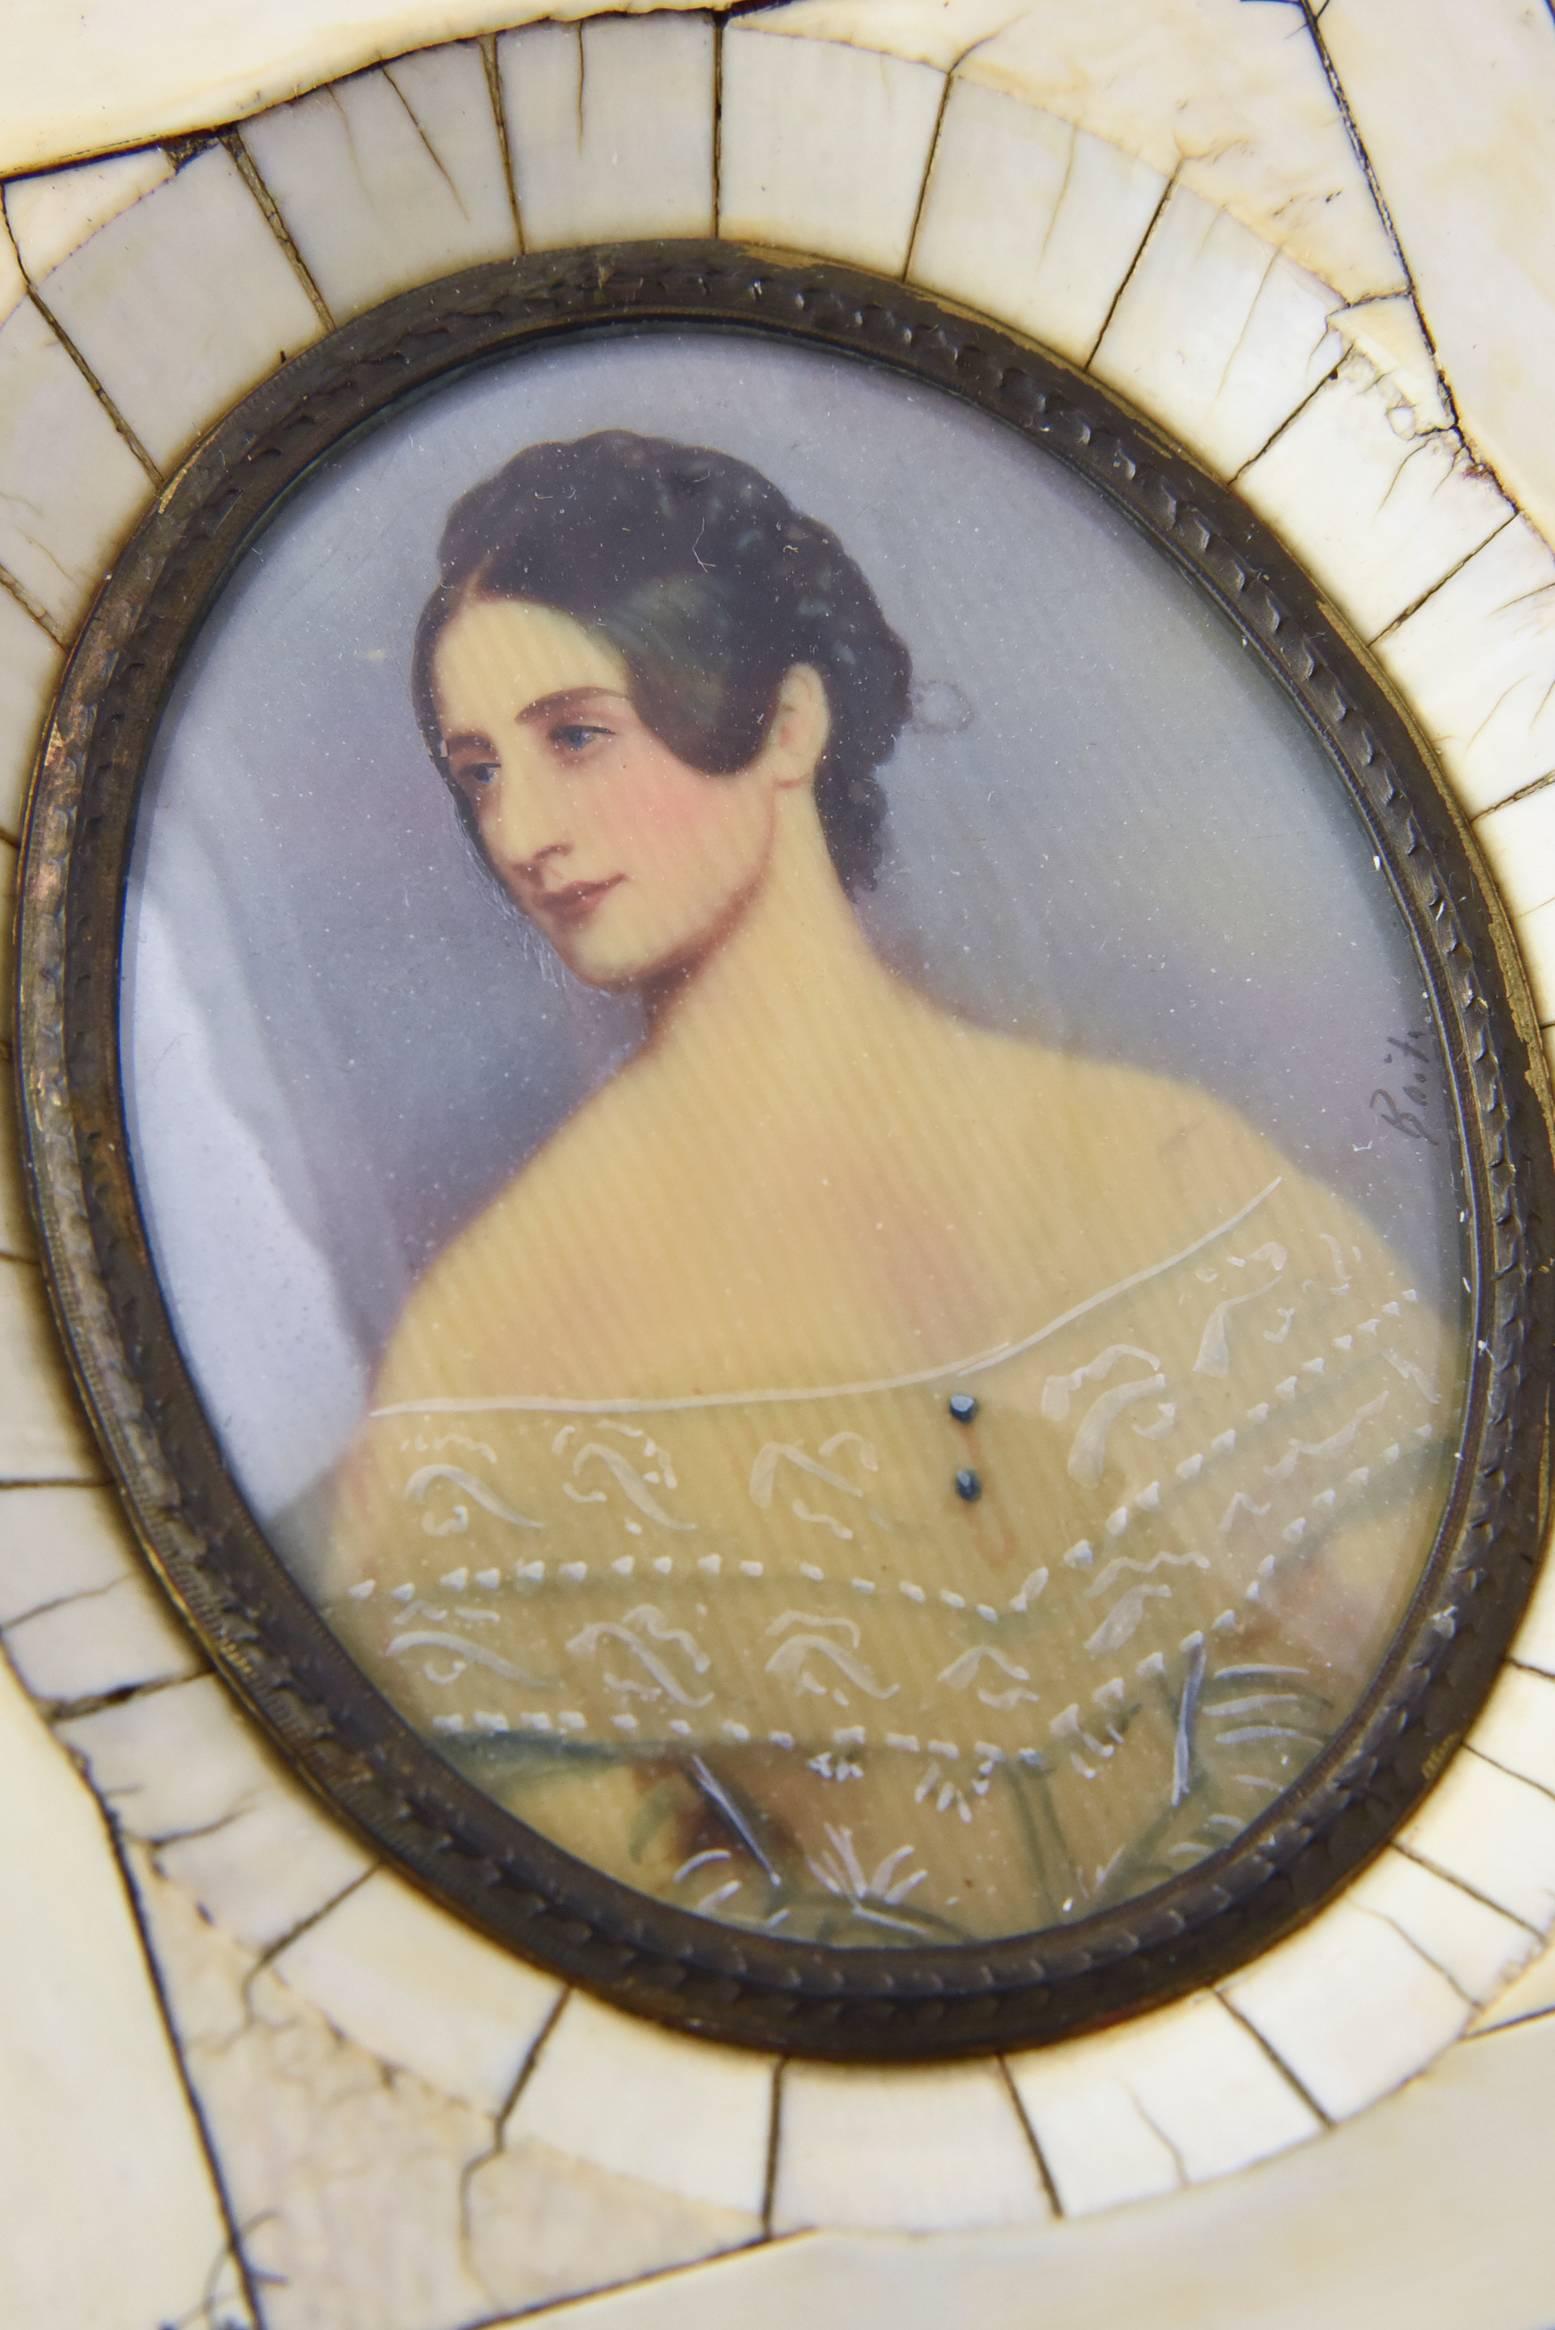 Other Antique Hand-Painted Portrait of Woman on Celluloid in Bone Frame